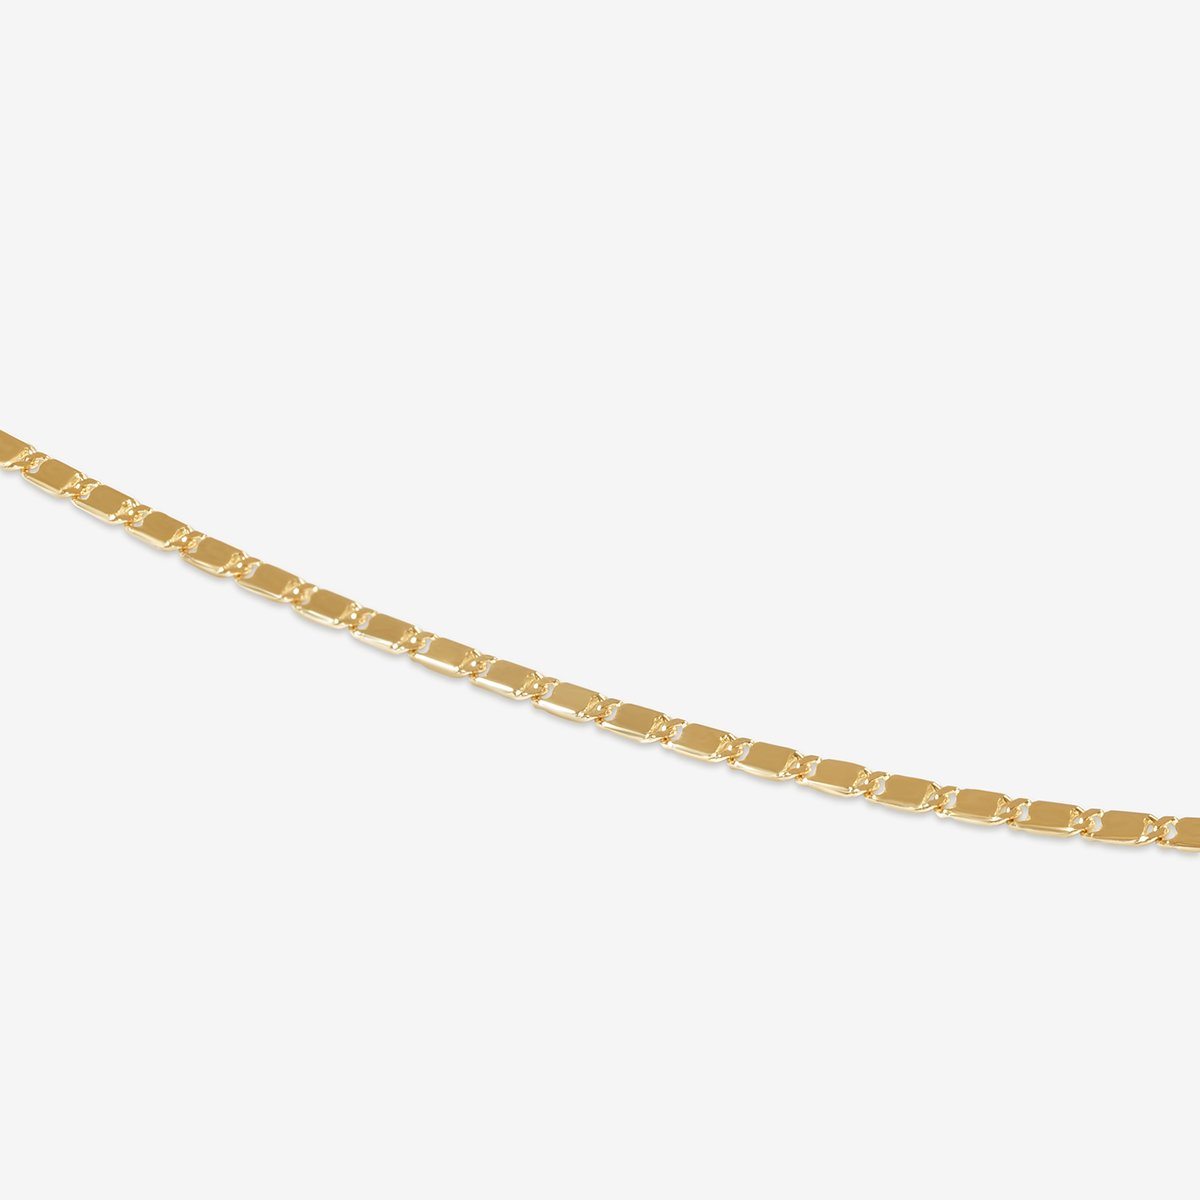 Yellow 14K Flat Herringbone Chain 4mm to 7mm Necklace Gold Plated | eBay